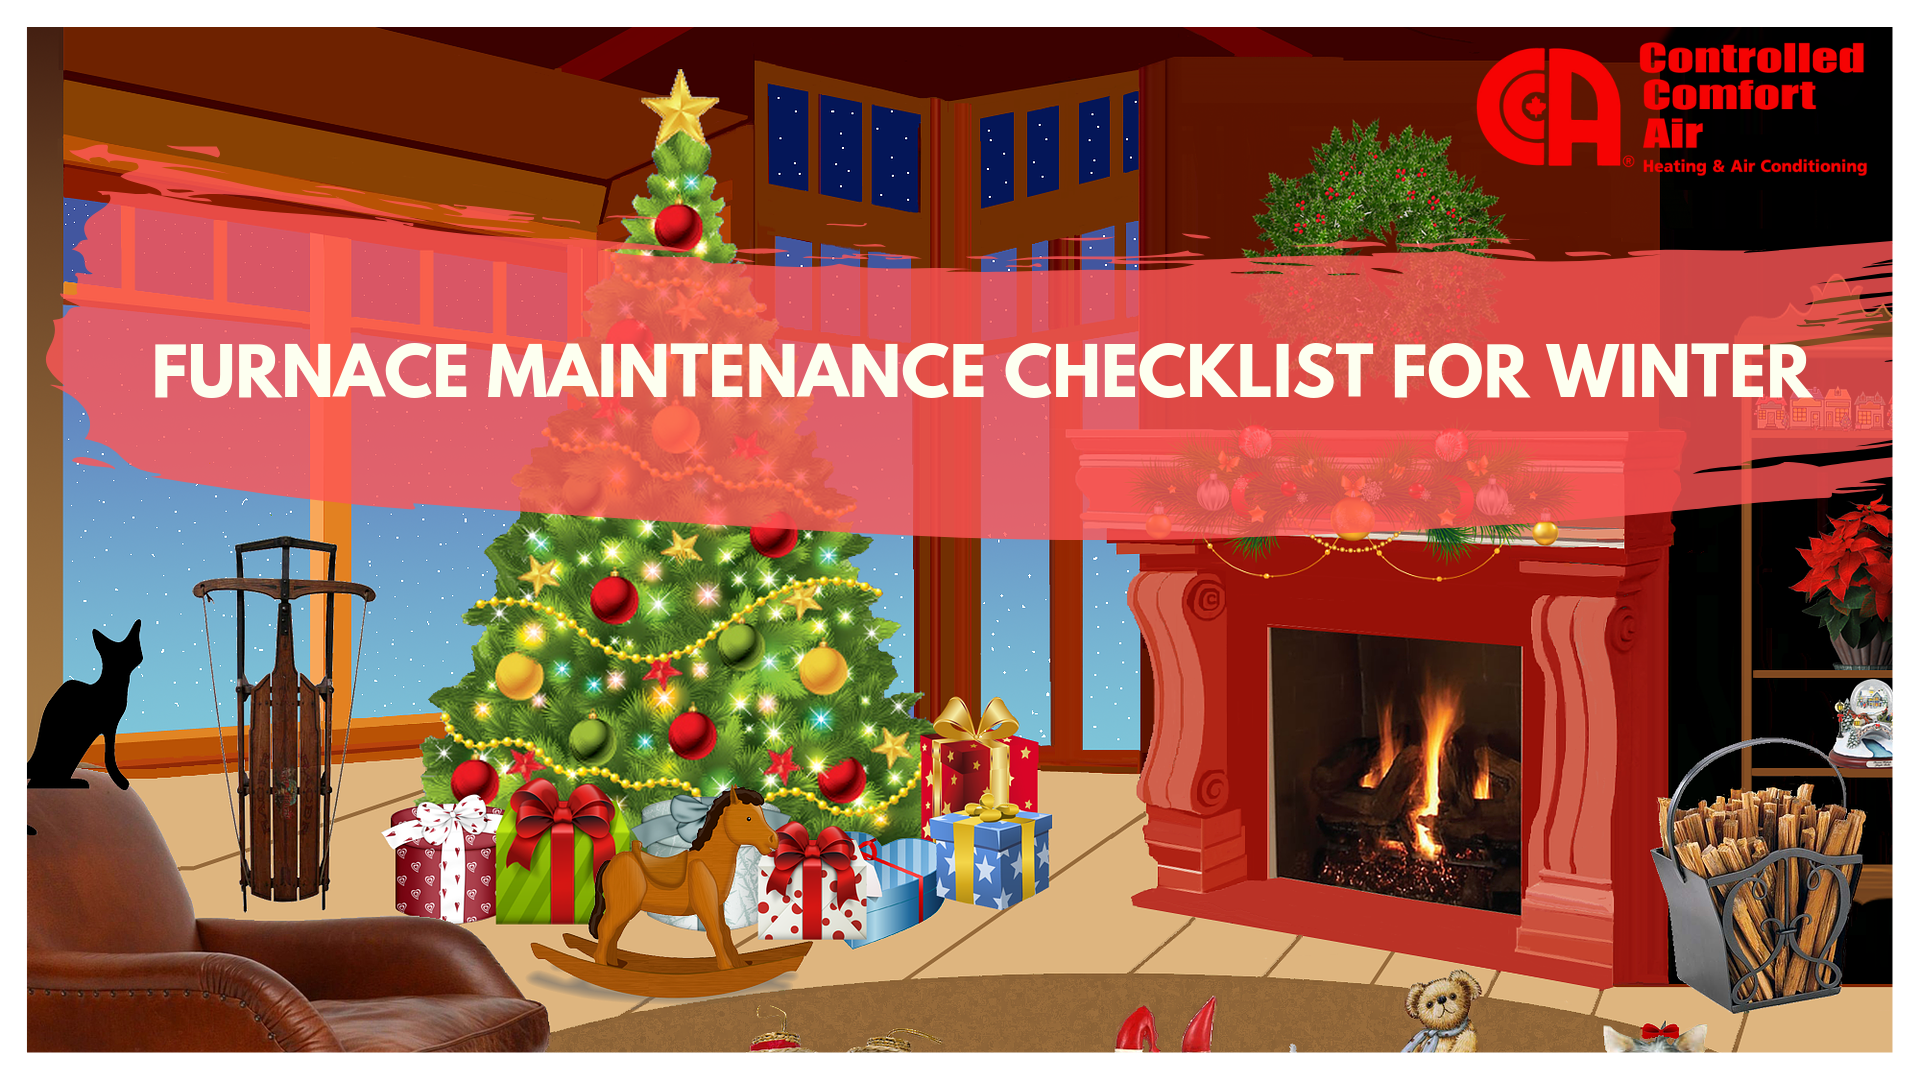 7 Ways to Prepare For Winter Using the Furnace Maintenance Checklist